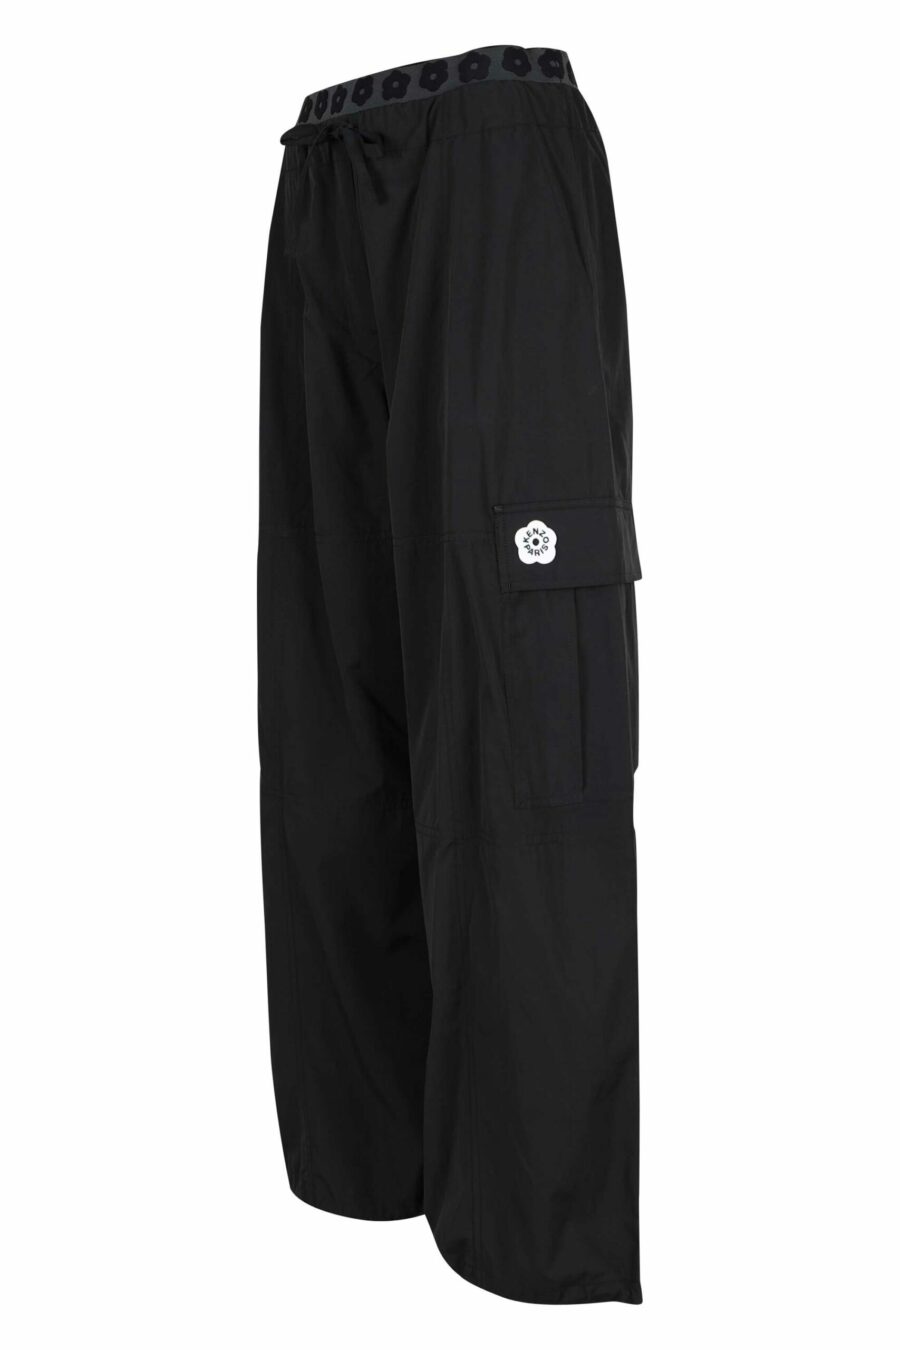 Black cargo trousers with "boke flower" logo - 3612230658301 1 scaled